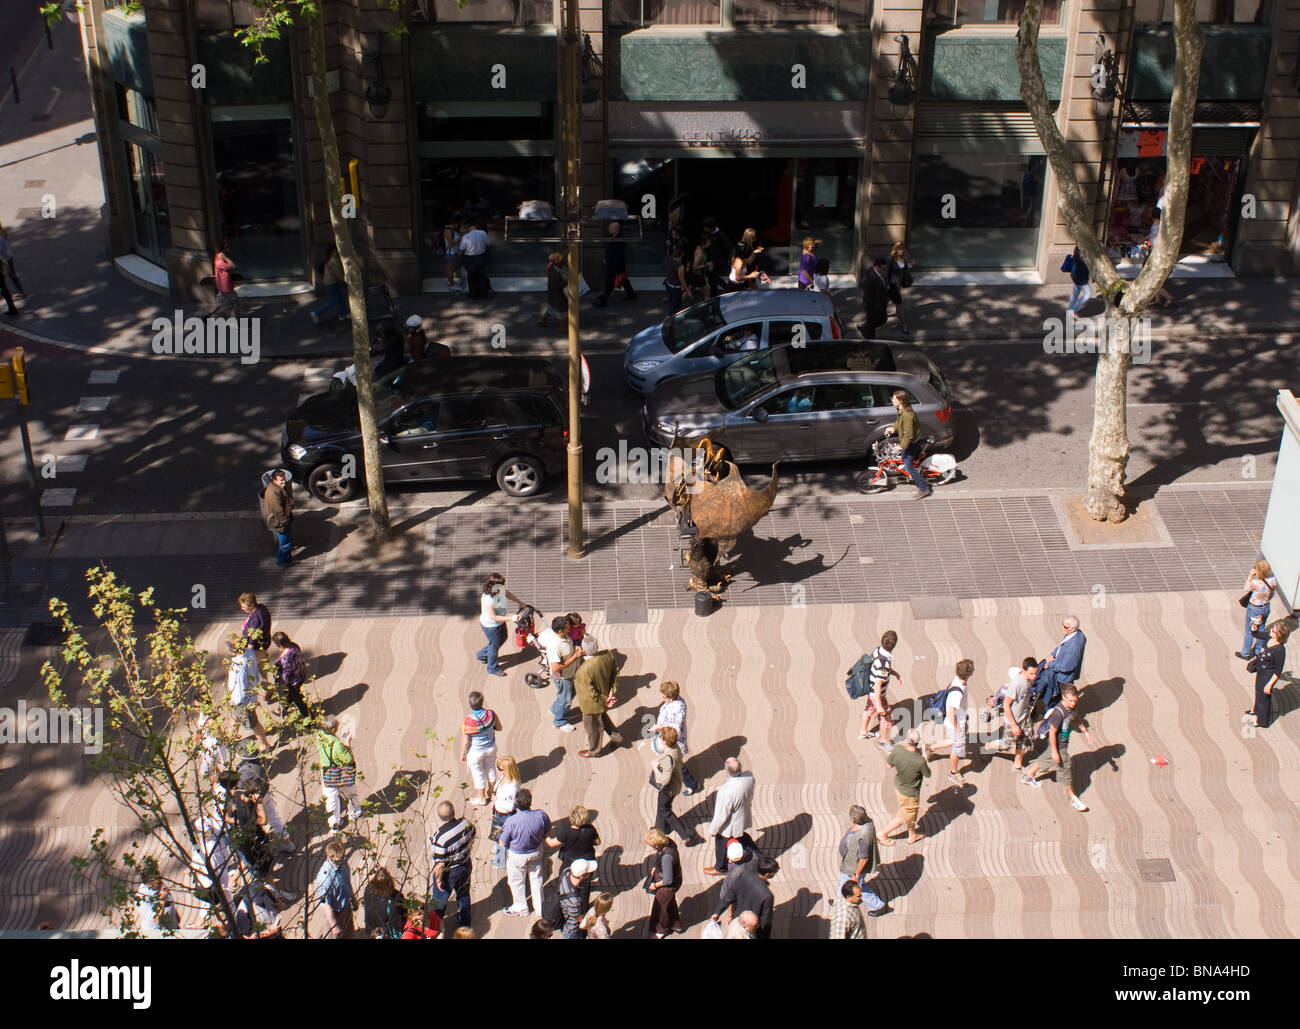 AERIAL VIEW OF PEOPLE WALKING DOWN LAS RAMBLAS BARCELONA SPAIN VIEW FROM ABOVE LOOKING DOWN Stock Photo